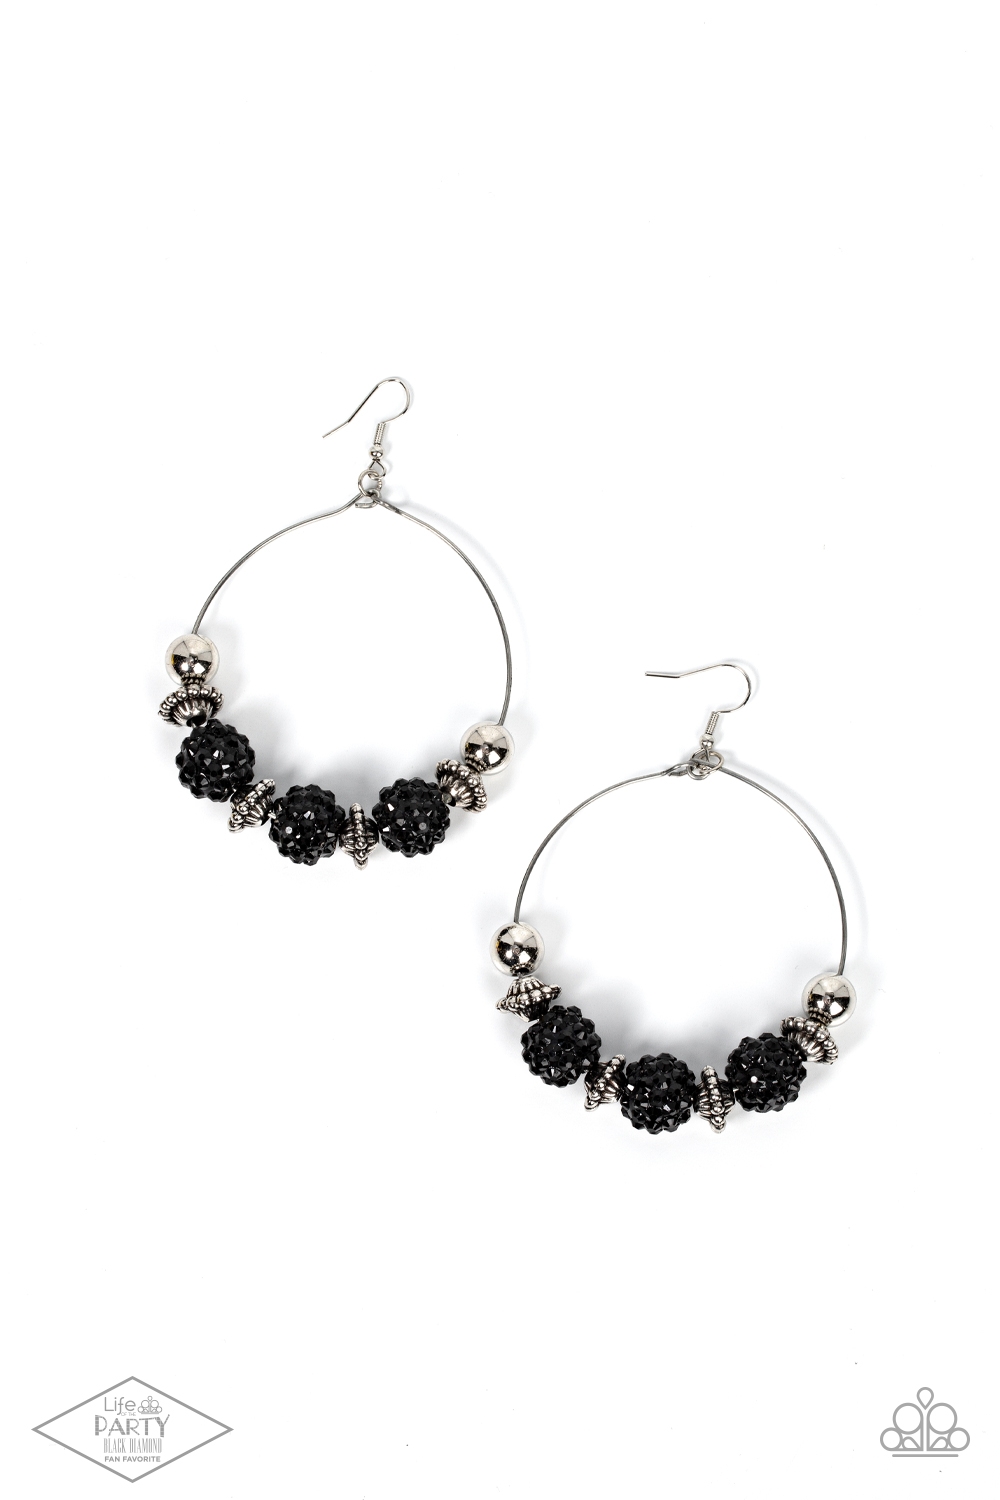 Earring - I Can Take a Compliment - Black